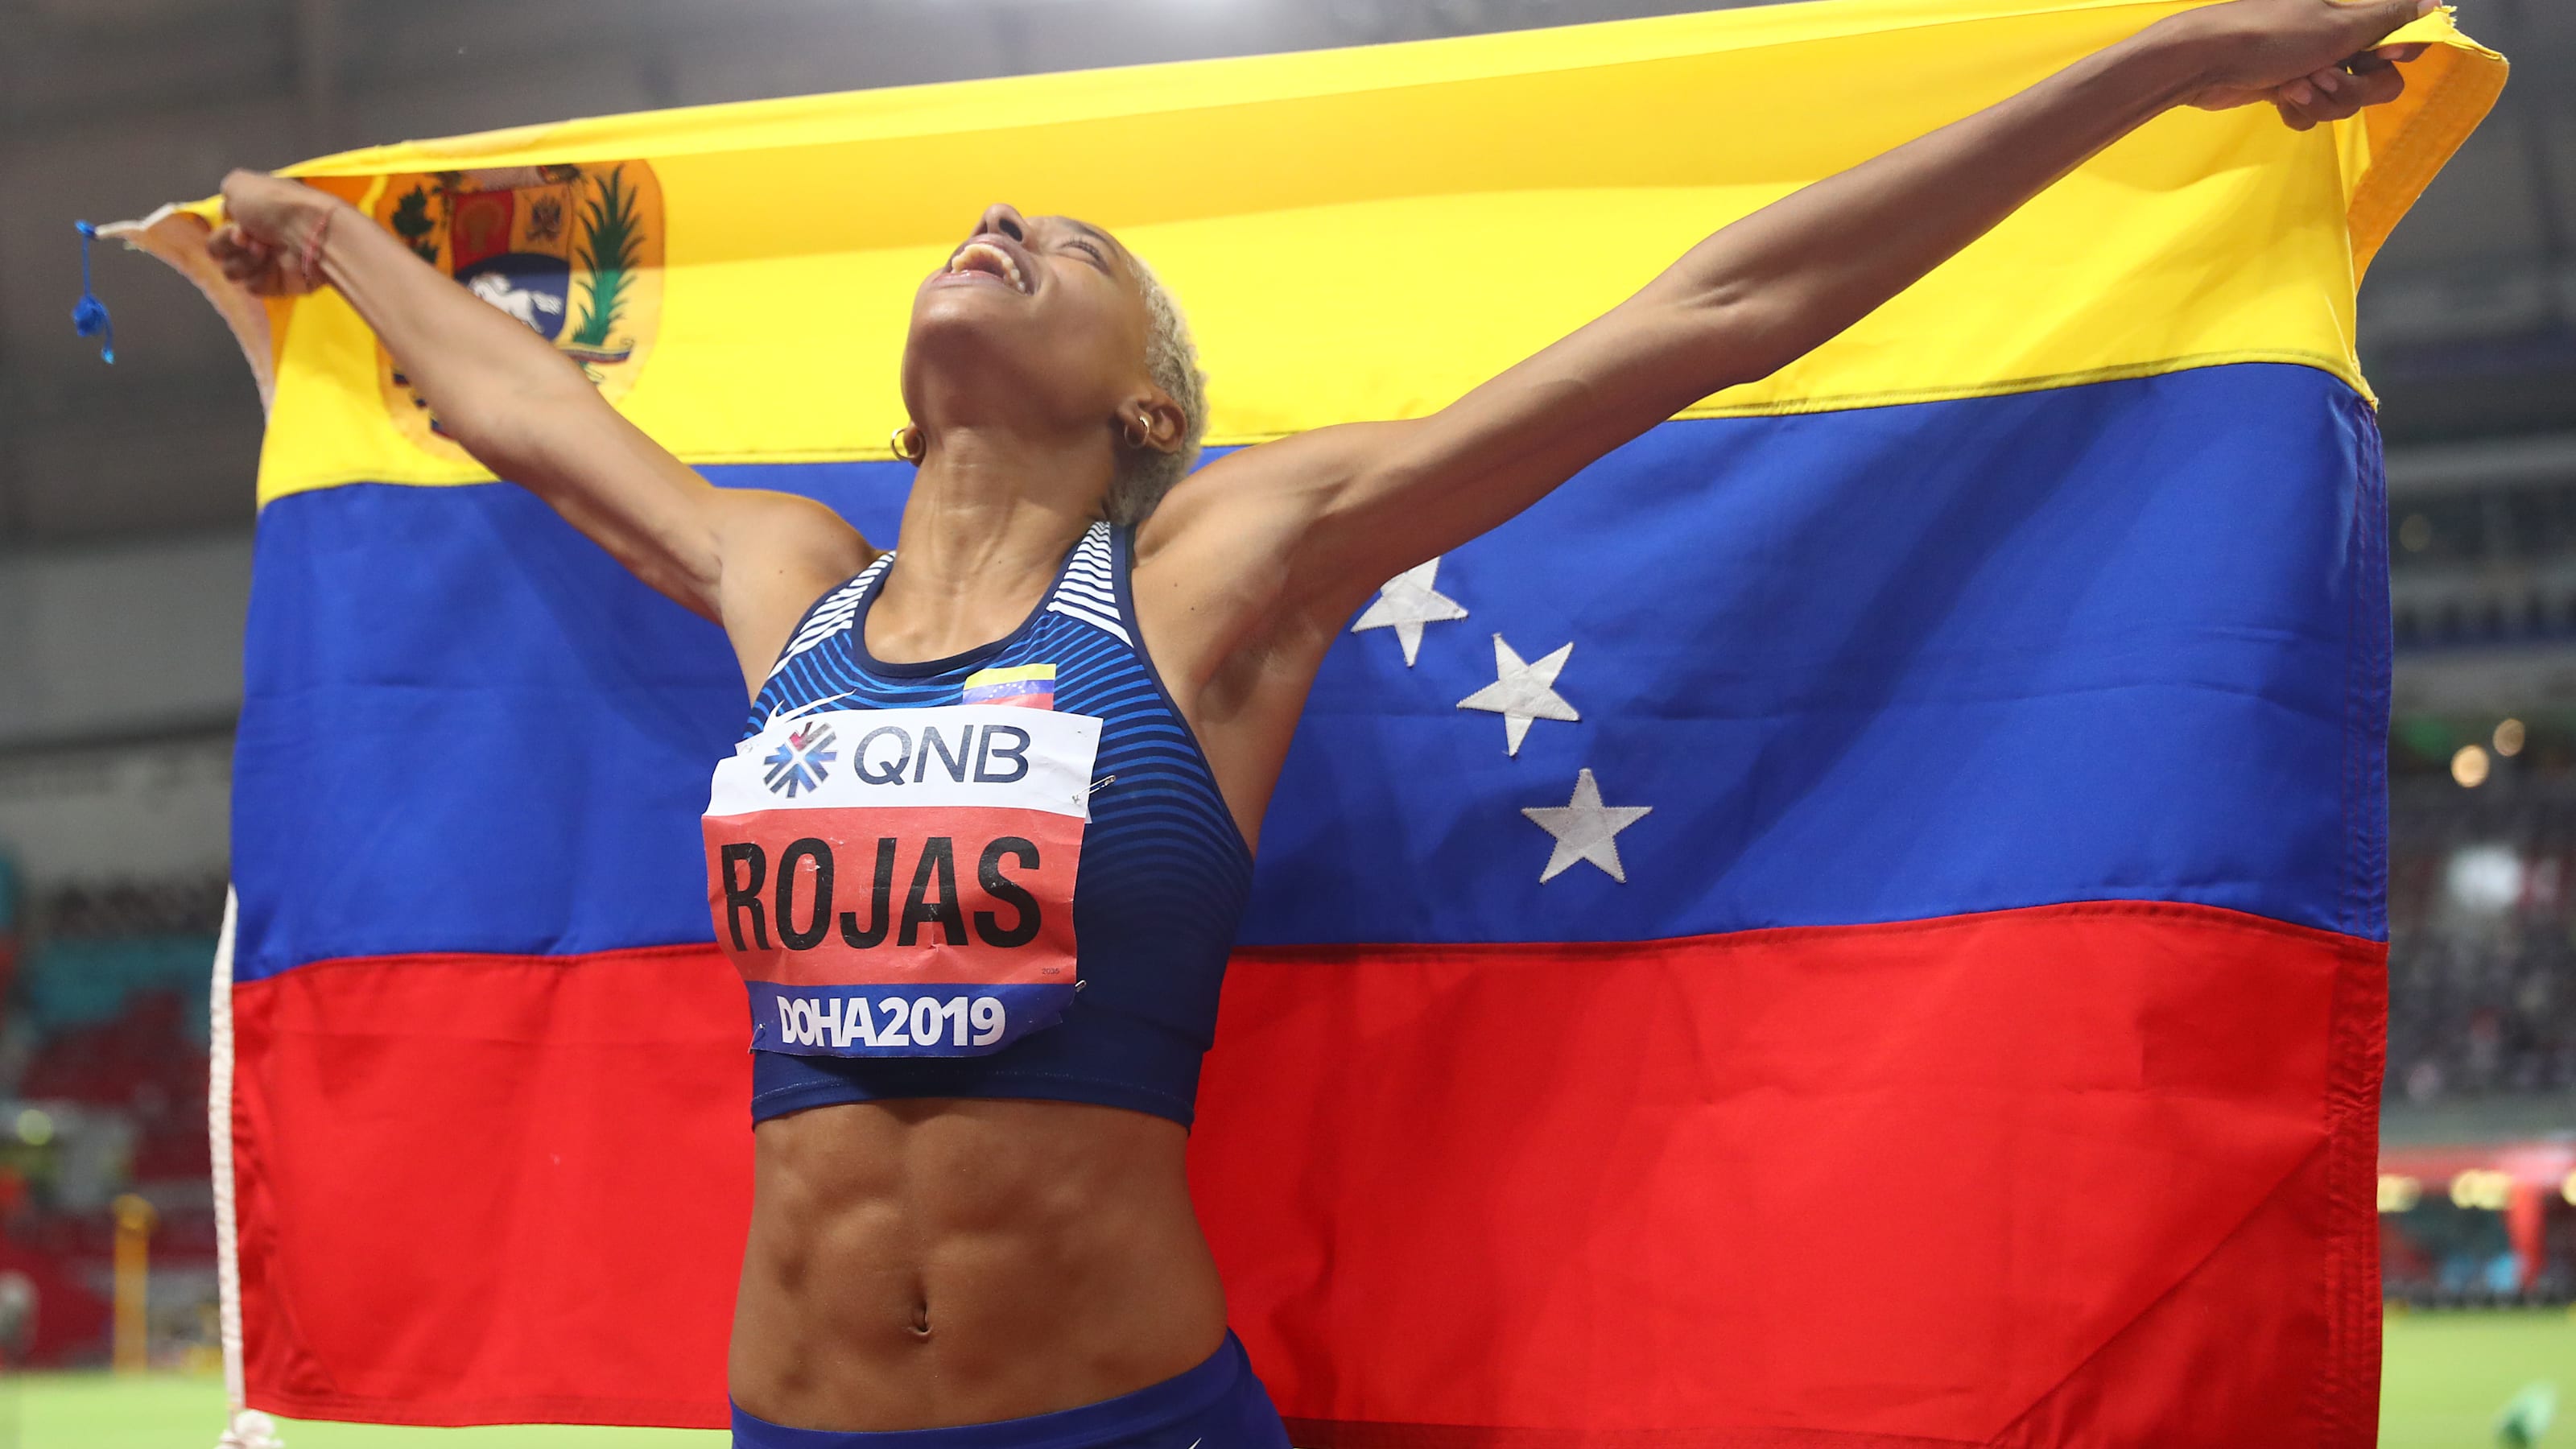 Yulimar Rojas: "I've always dreamt about winning Olympic gold."